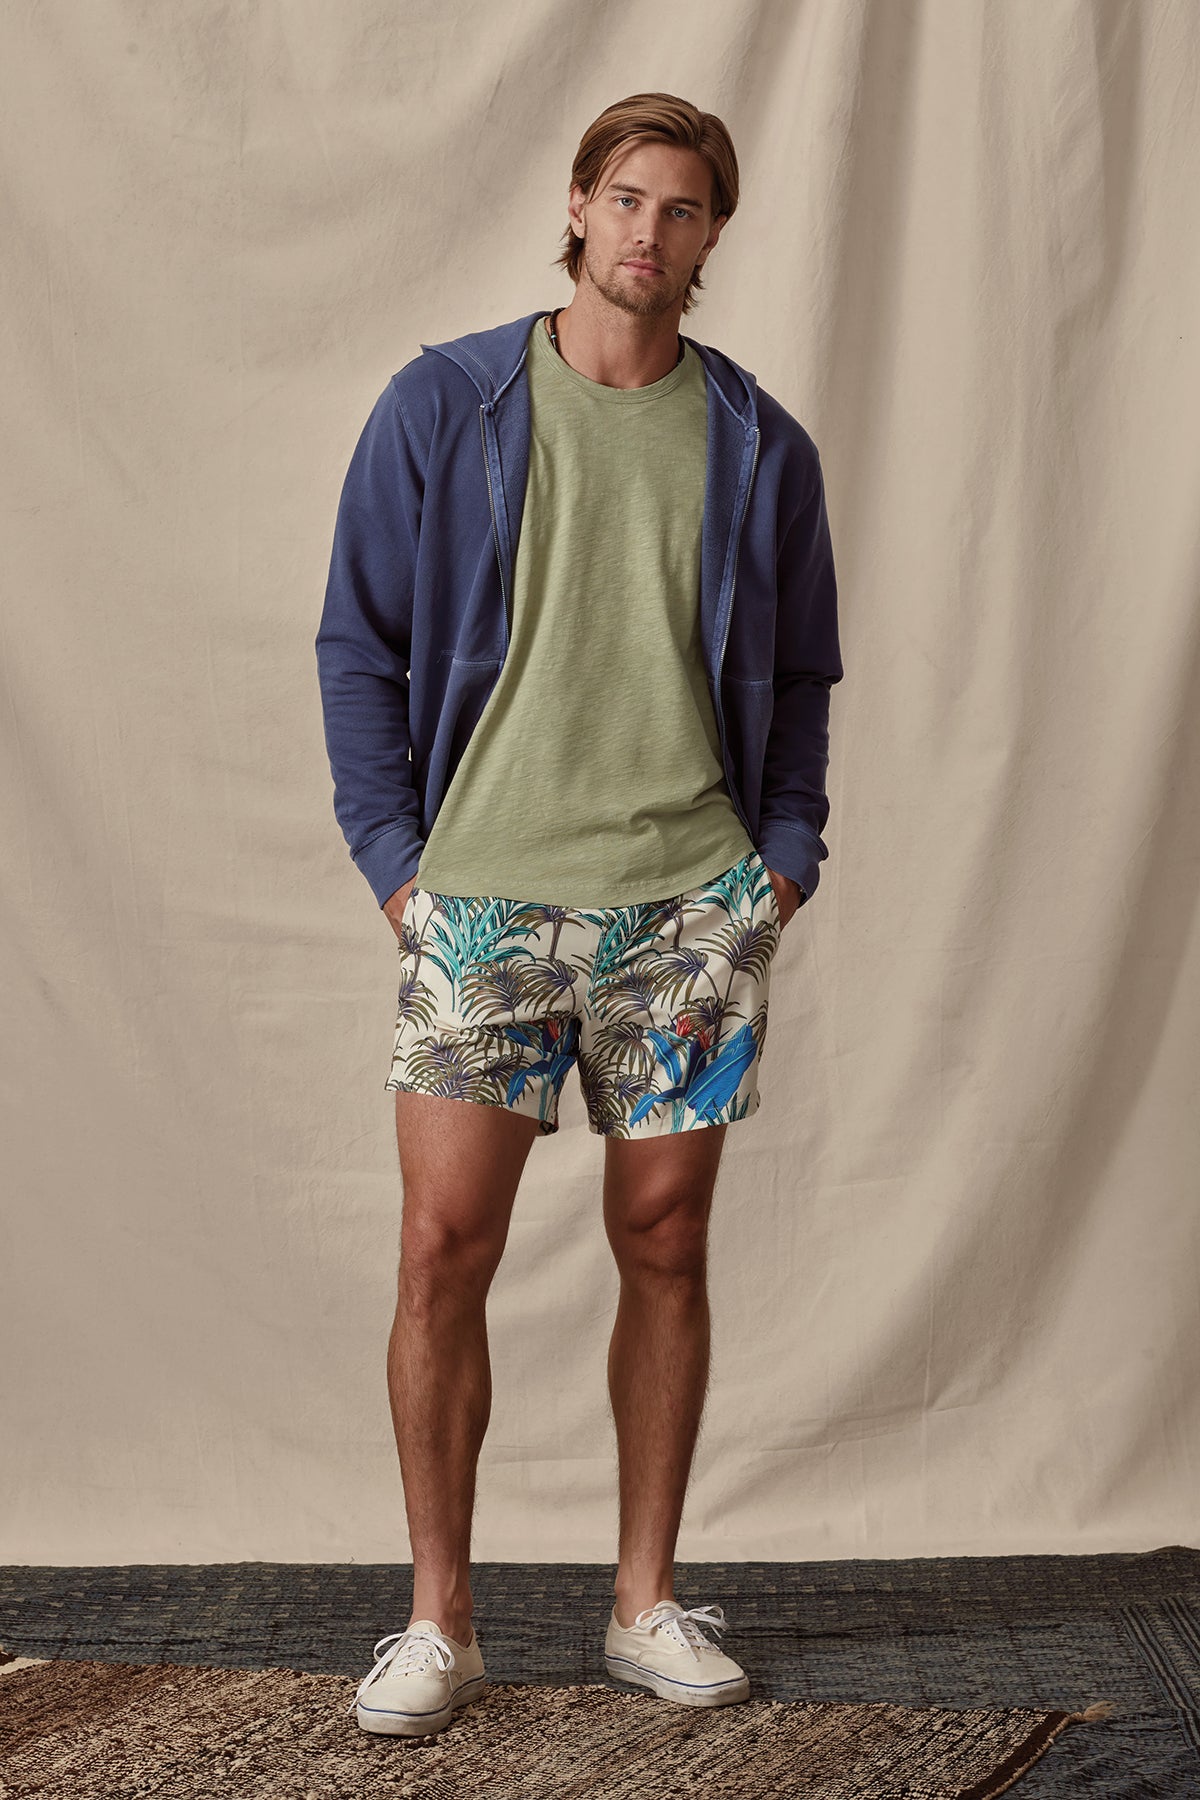 A man wearing a zip-up hoodie, t-shirt, and RICARDO SWIM SHORT by Velvet by Graham & Spencer stands confidently against a cream backdrop.-36732557951169